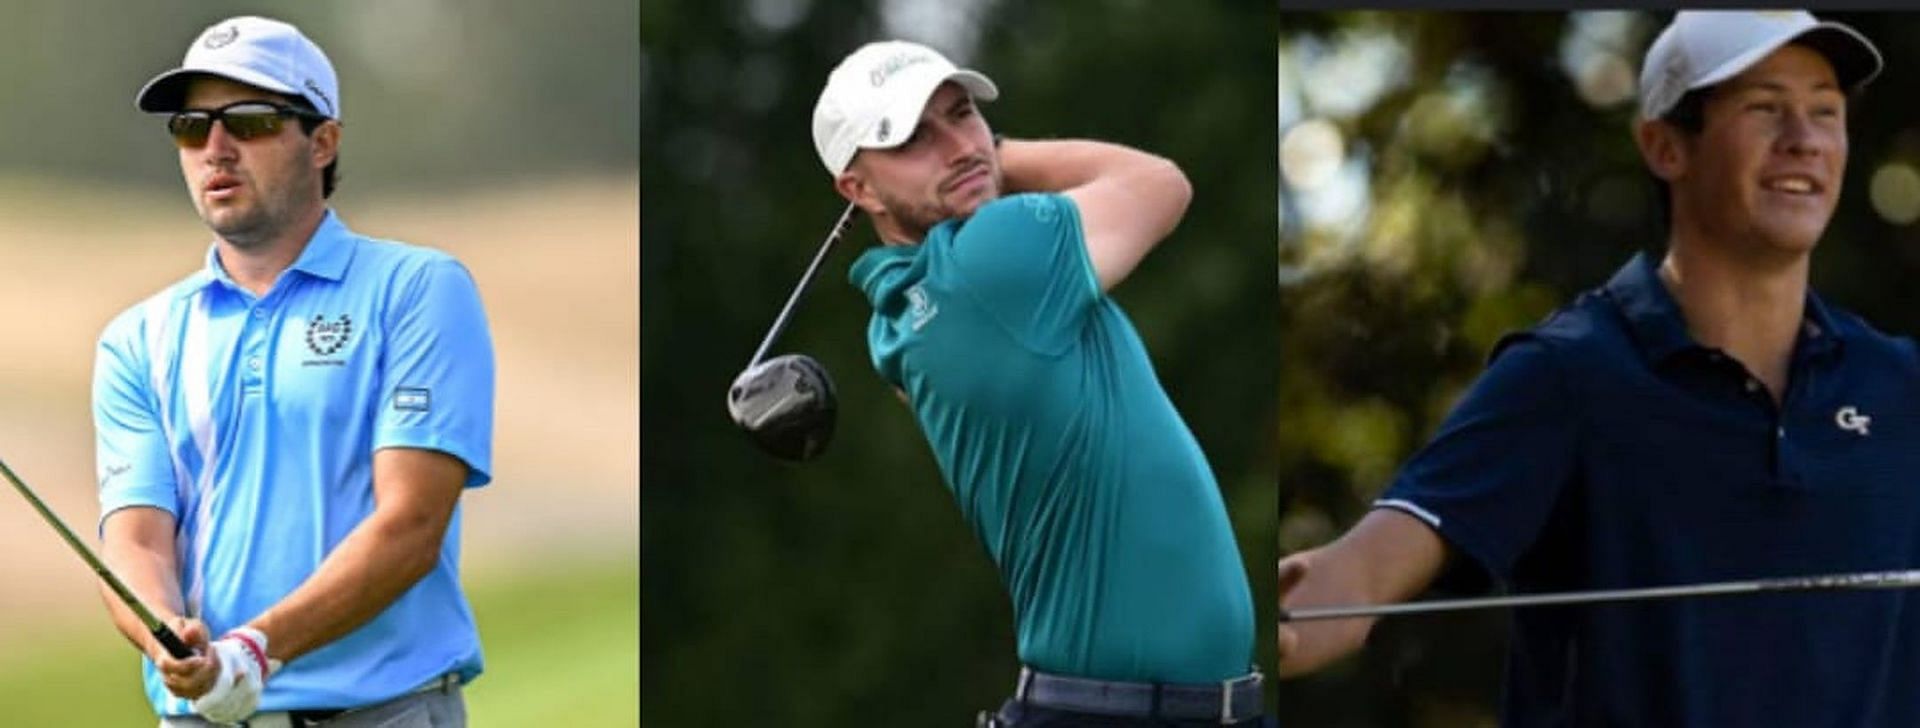 amateur golf stars who could shine at the LIV Golf promotions event